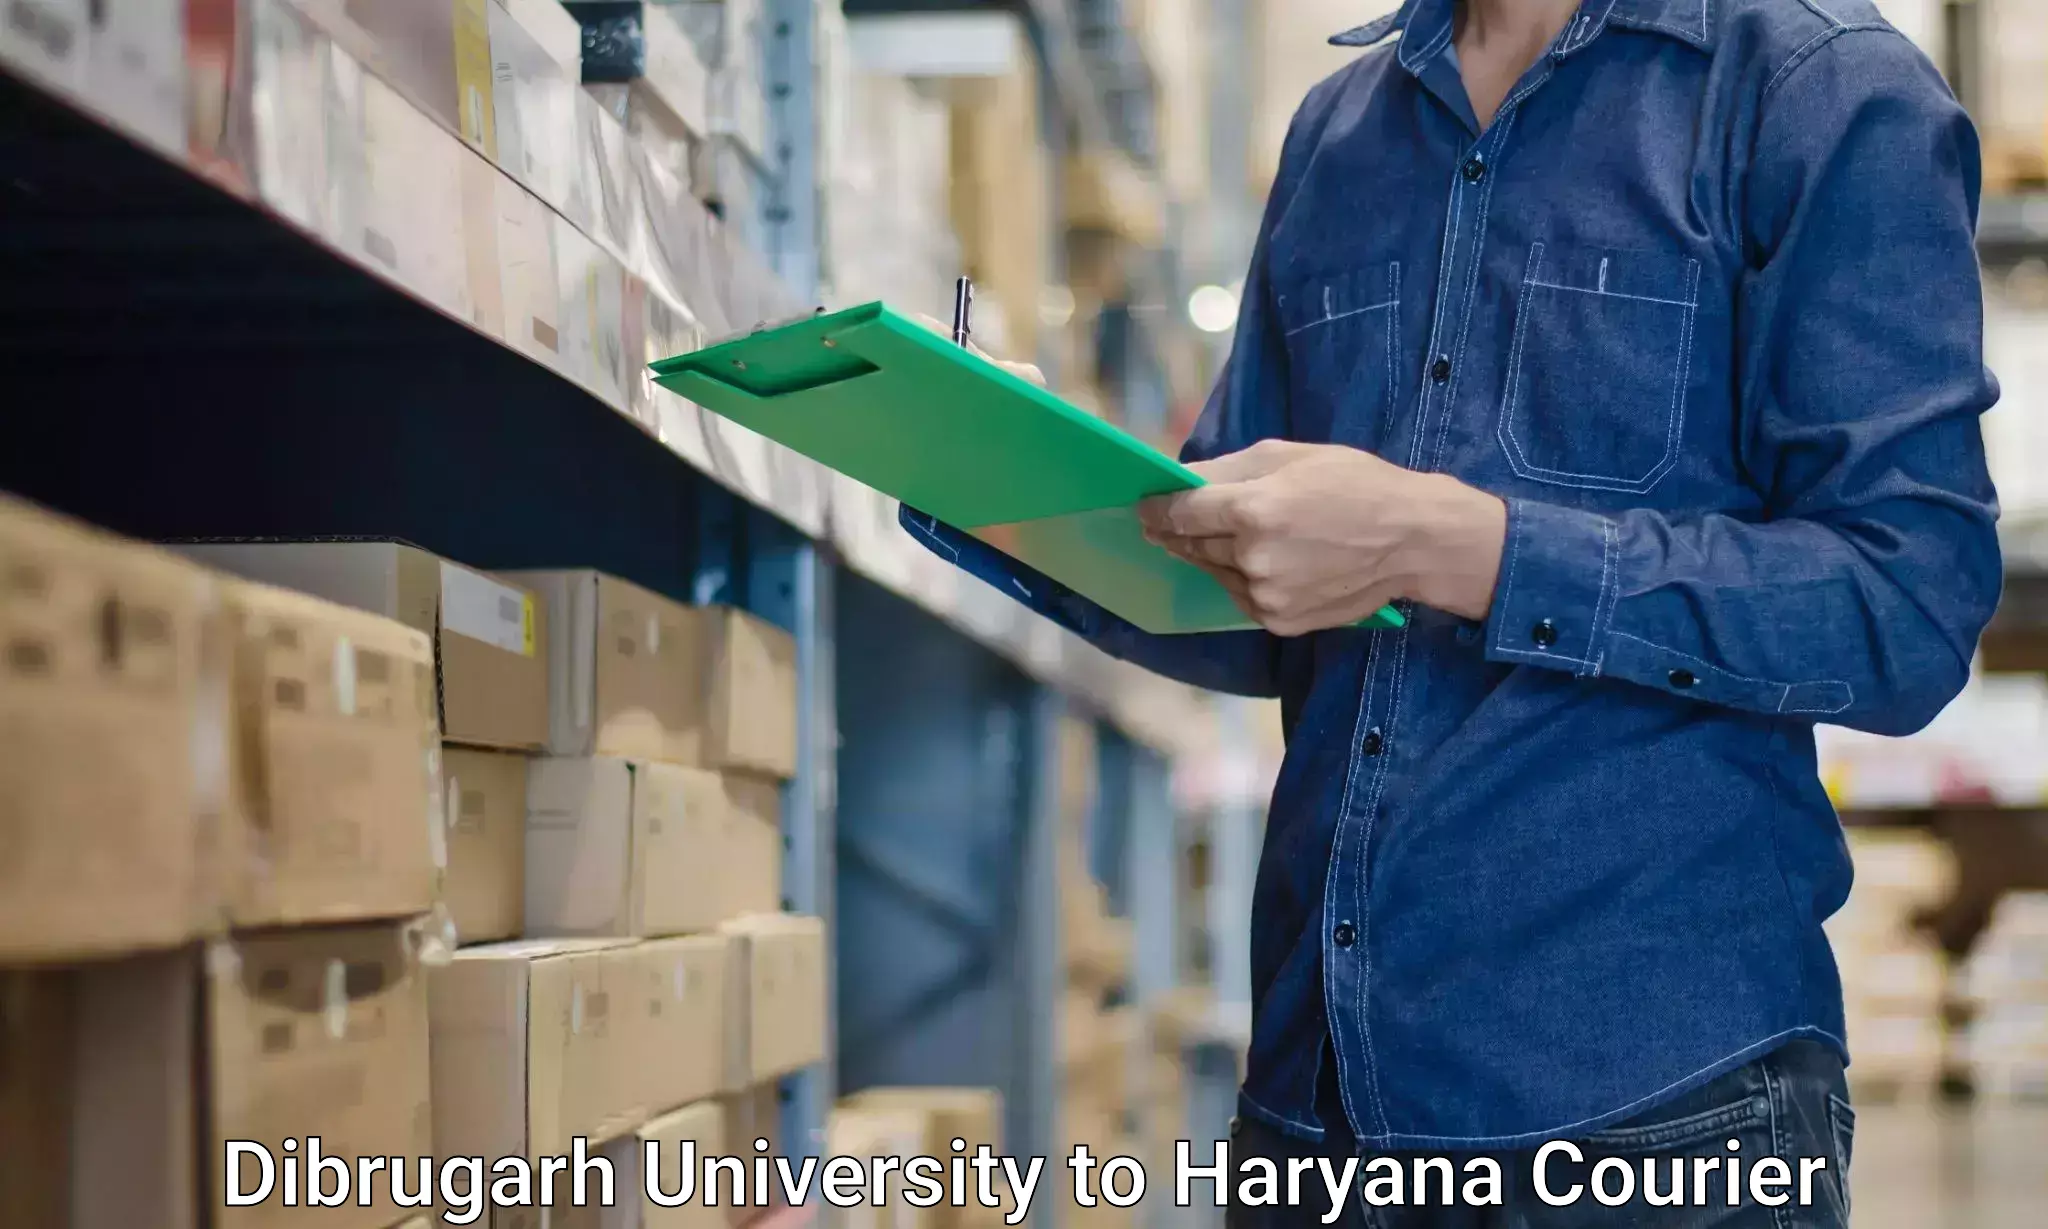 Full home moving services Dibrugarh University to Faridabad